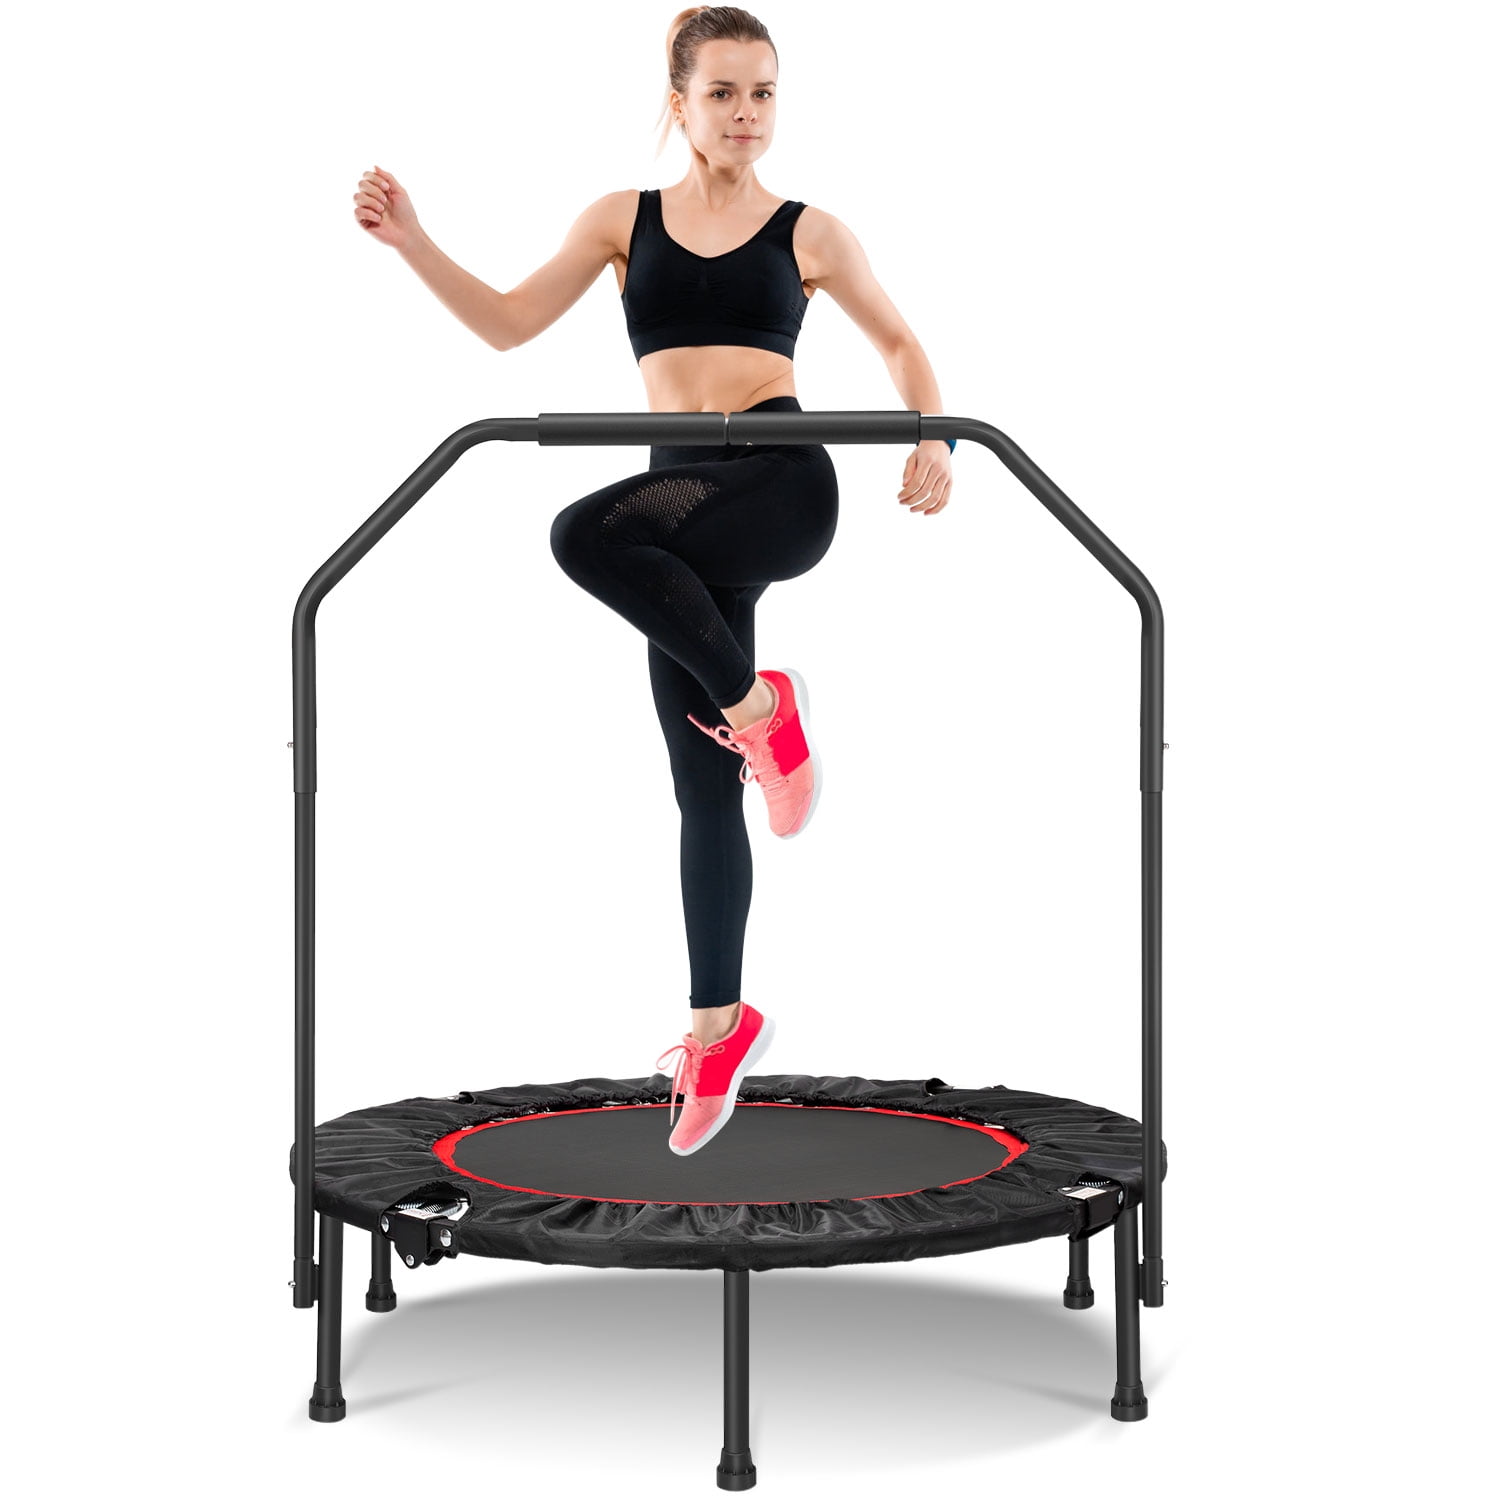 Details about   40" Foldable Mini Fitness Trampoline Exercise with 4-lever Foam Handle PVC Cover 